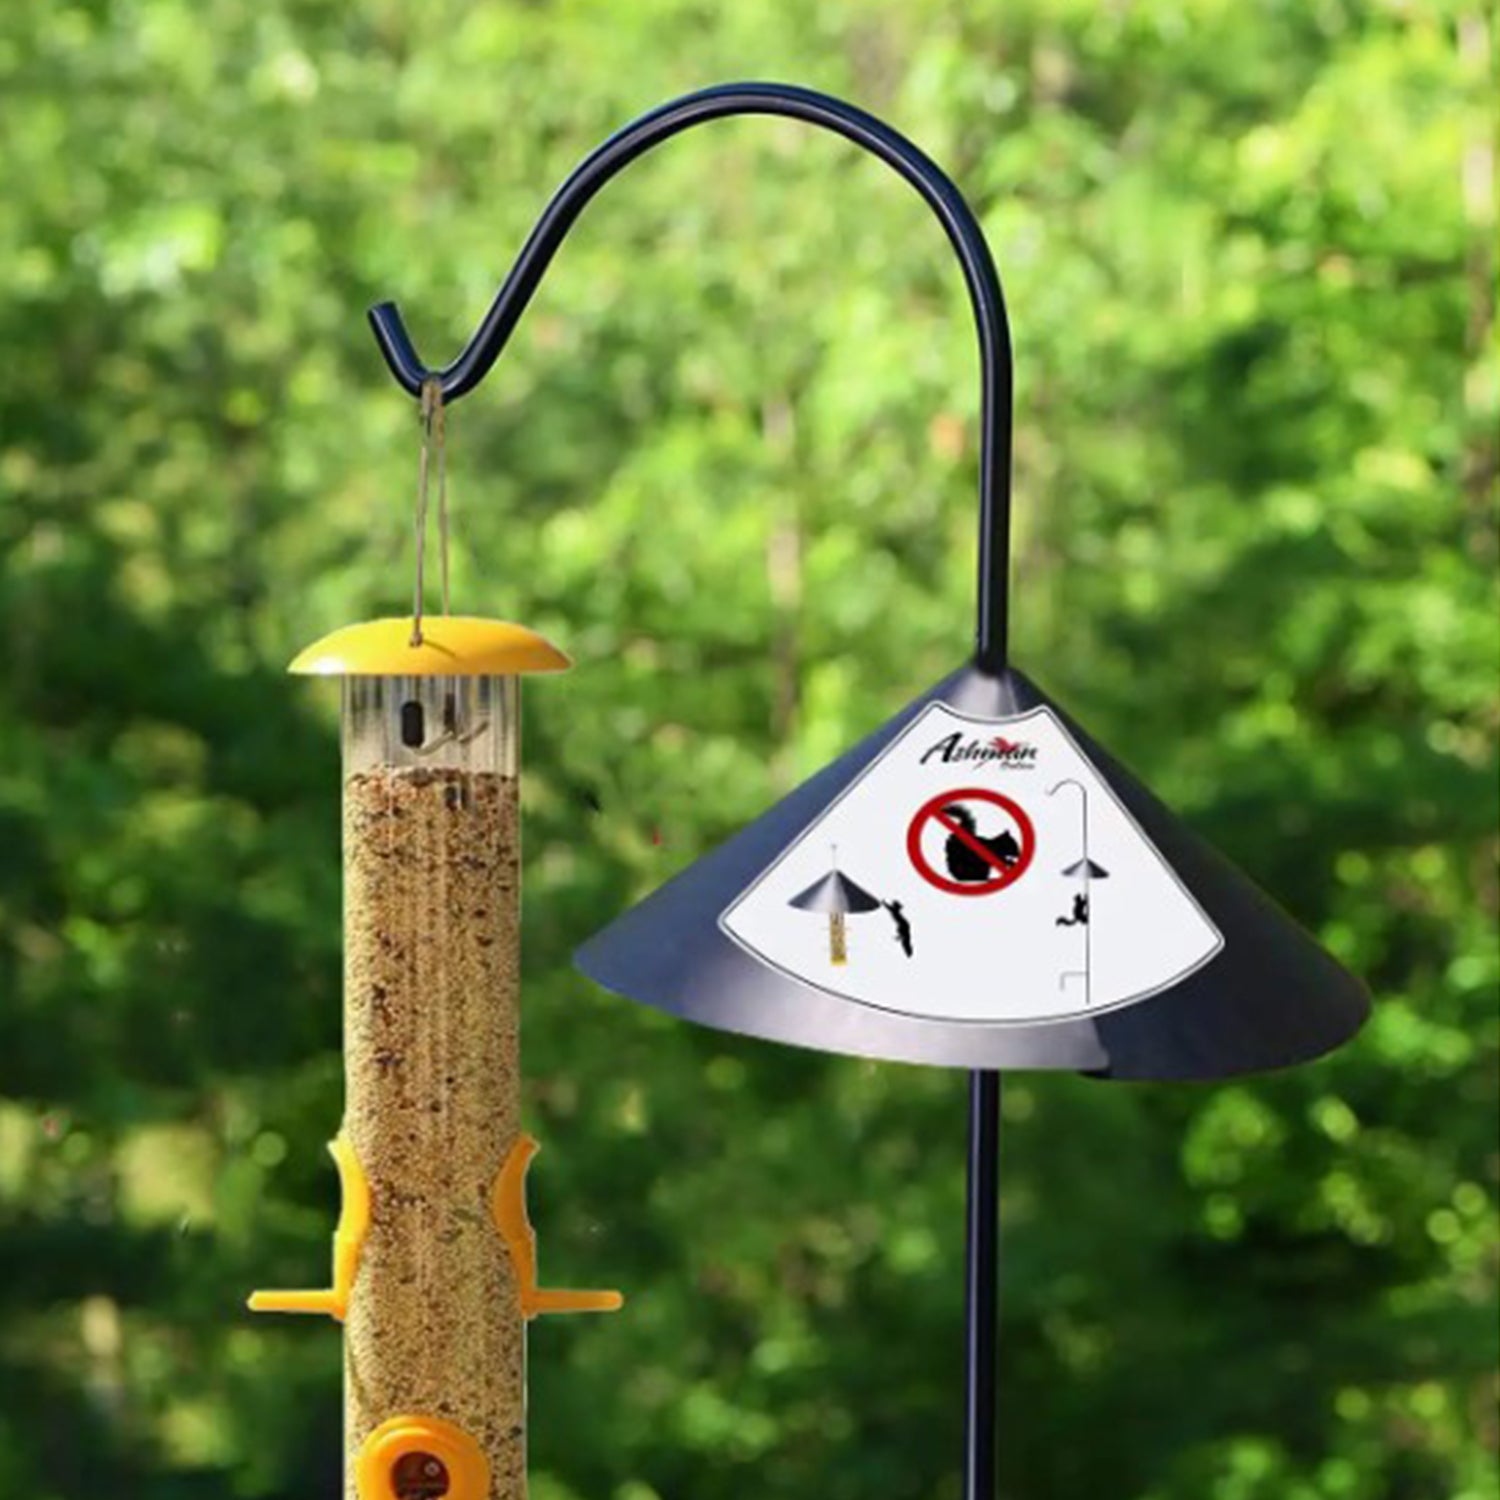 How To Stop Squirrels From Robbing Bird Feeders - For Good!